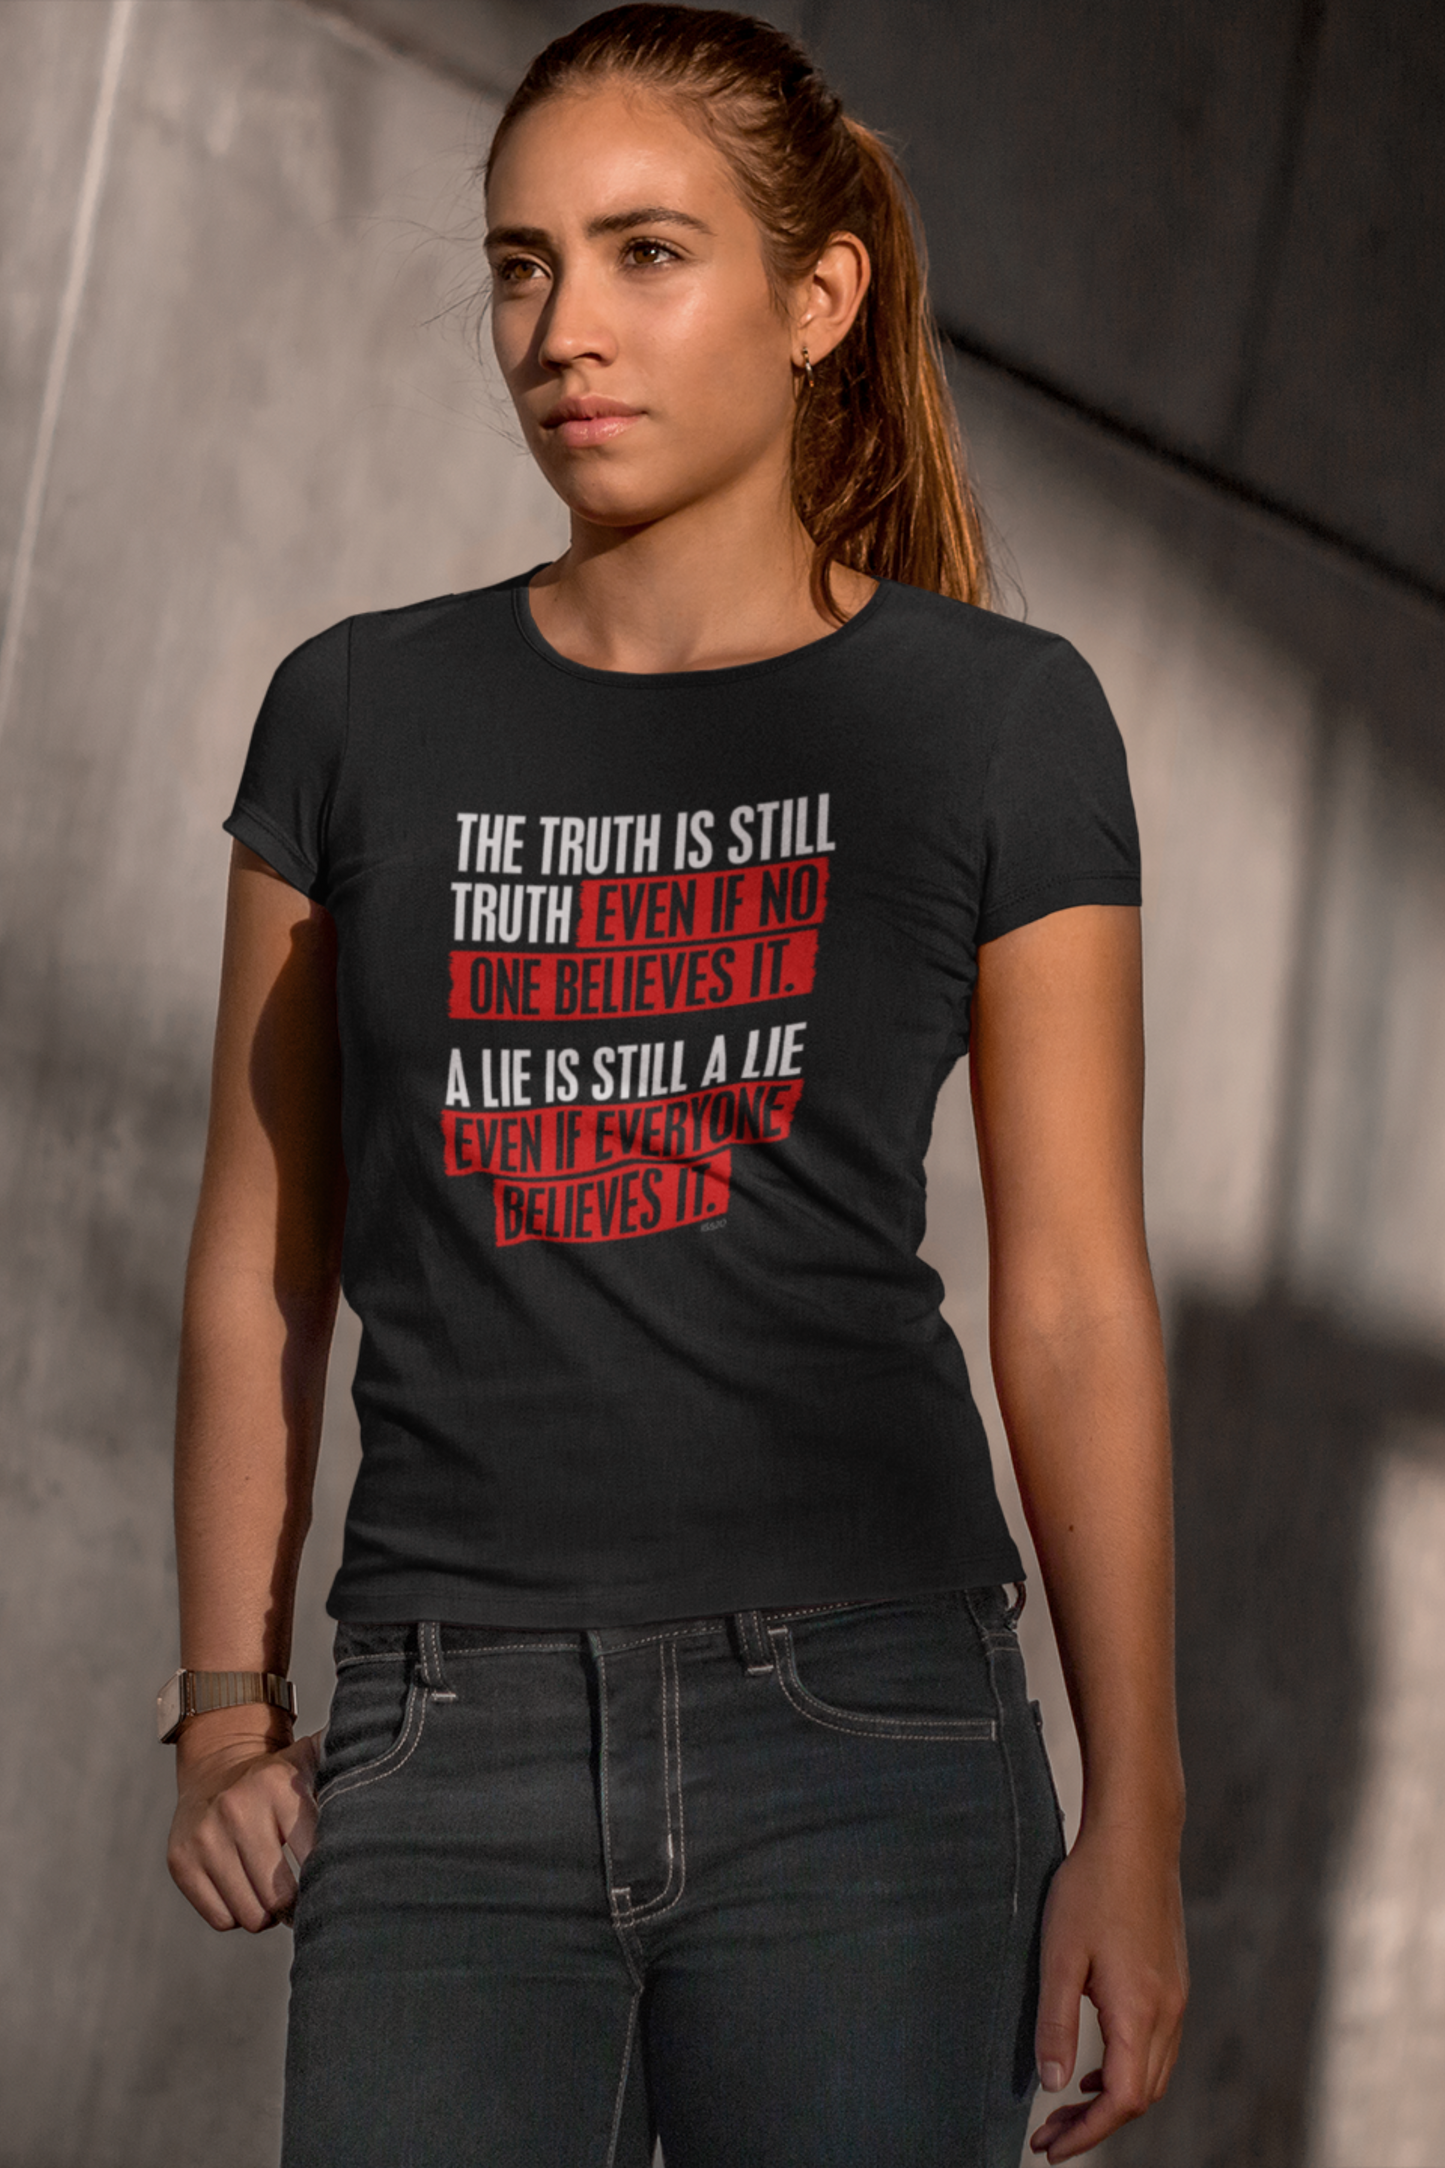 The Truth is still the Truth. Ladies Tee.